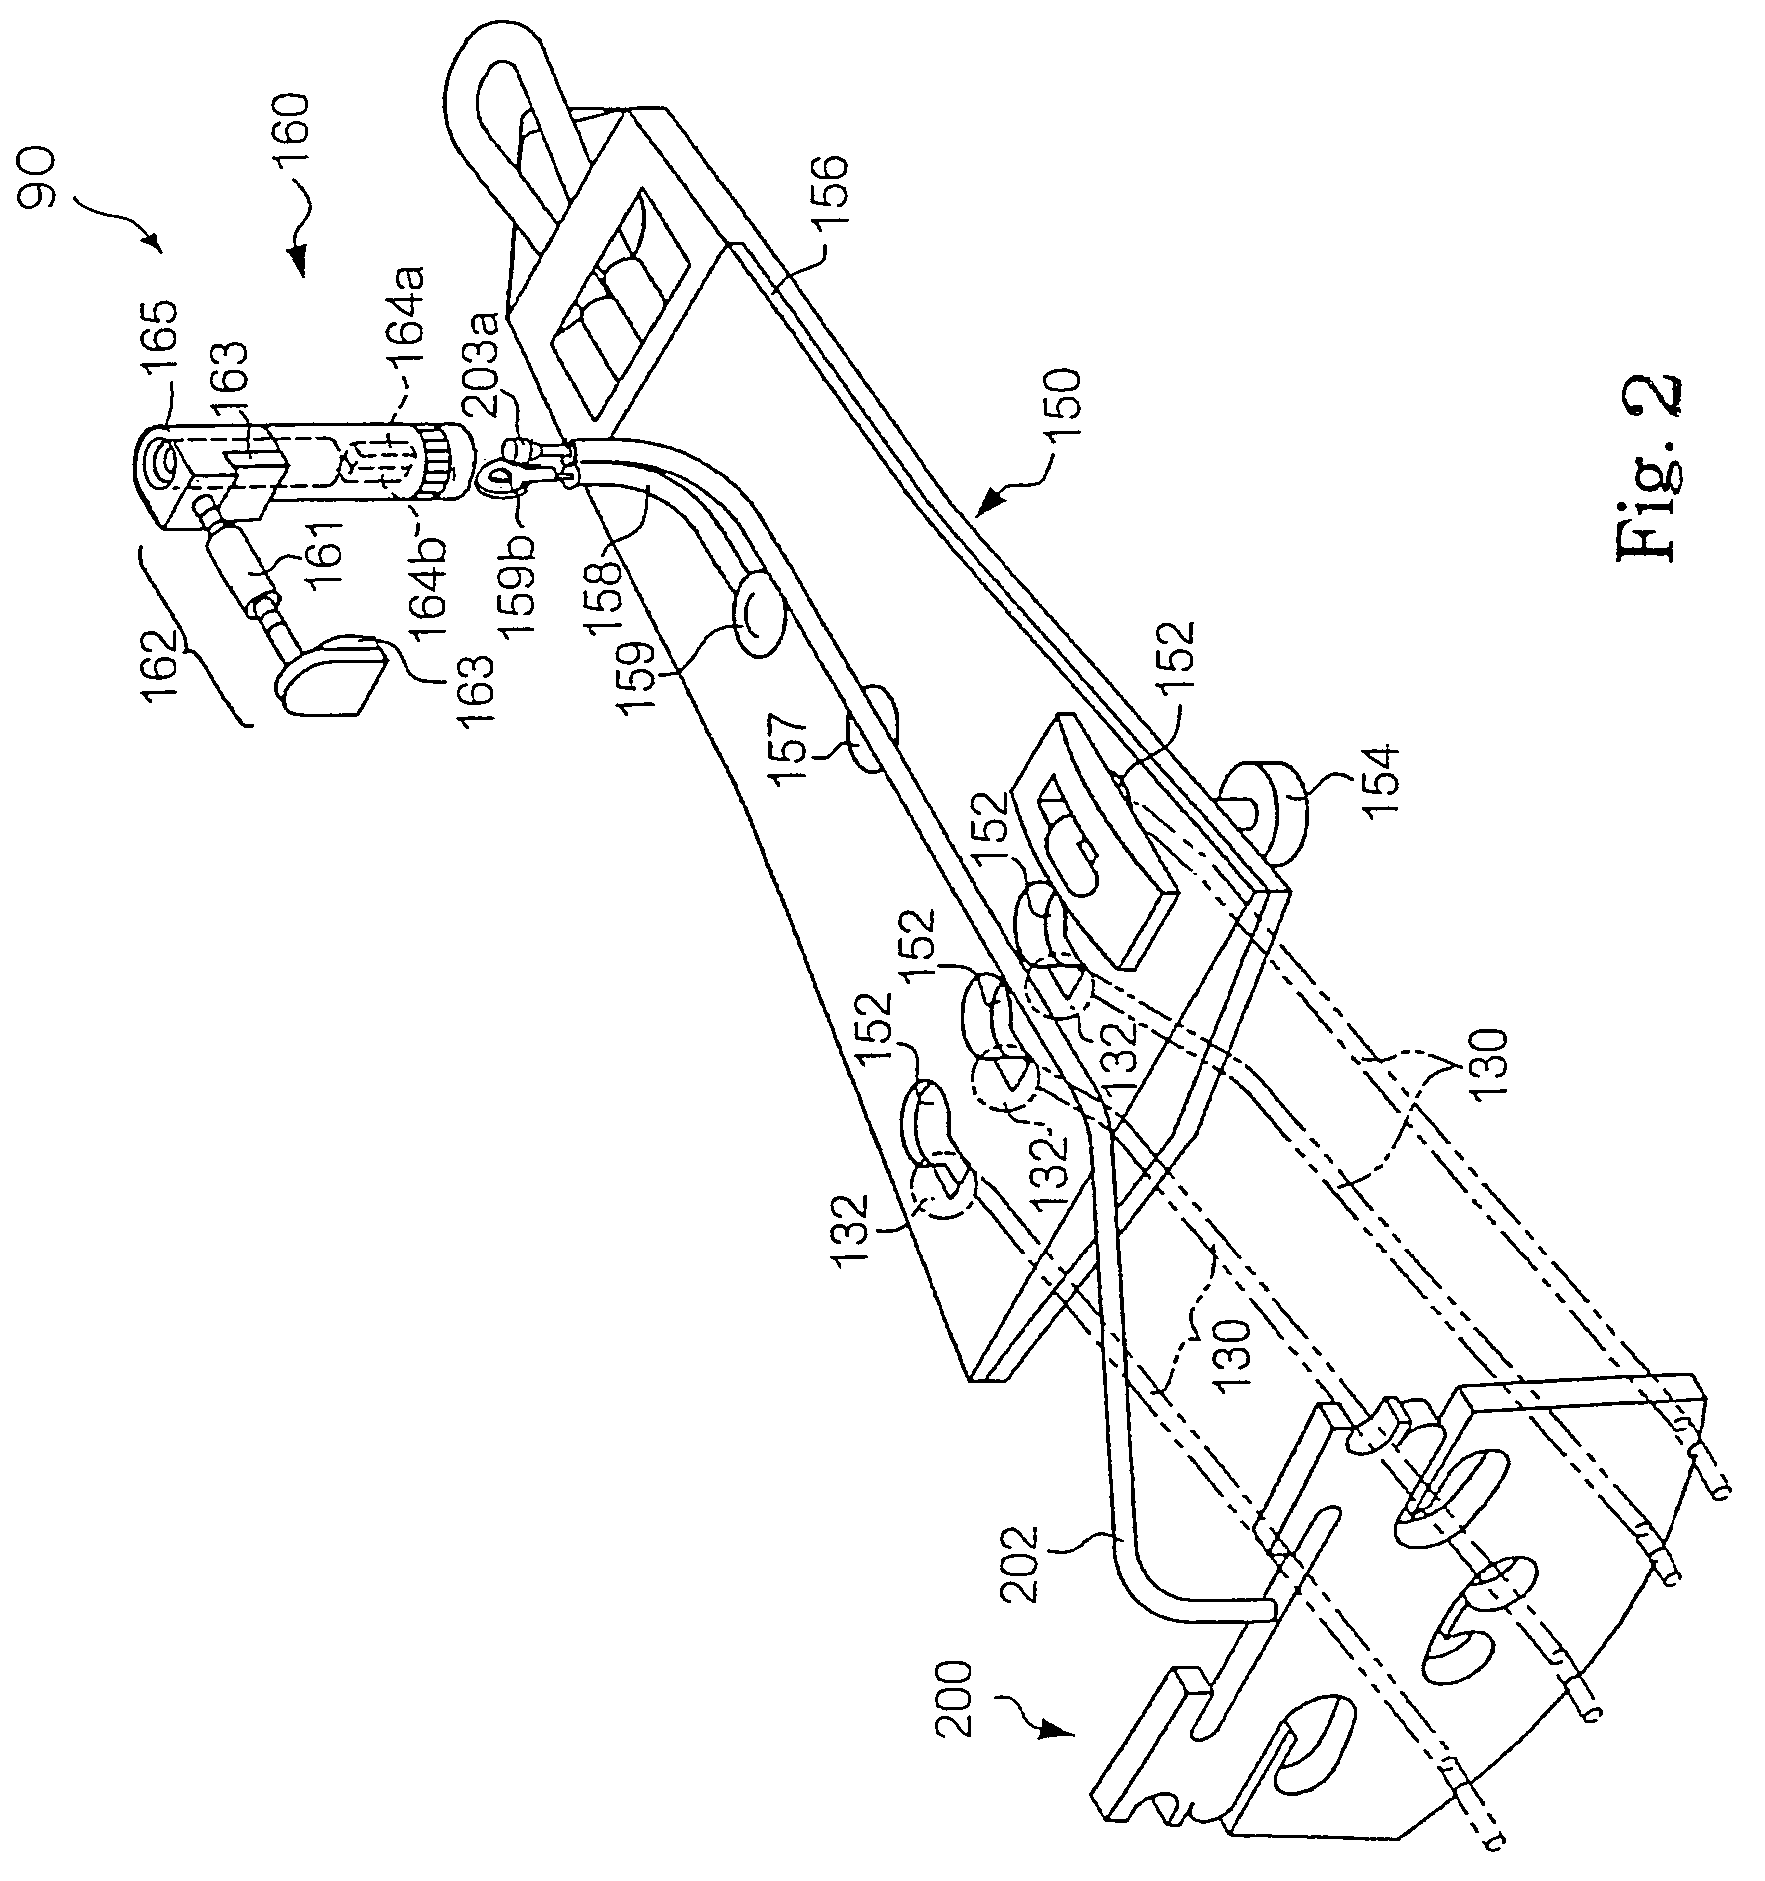 Stringed musical instrument equipped with pickup embedded in bridge and bridge used therein